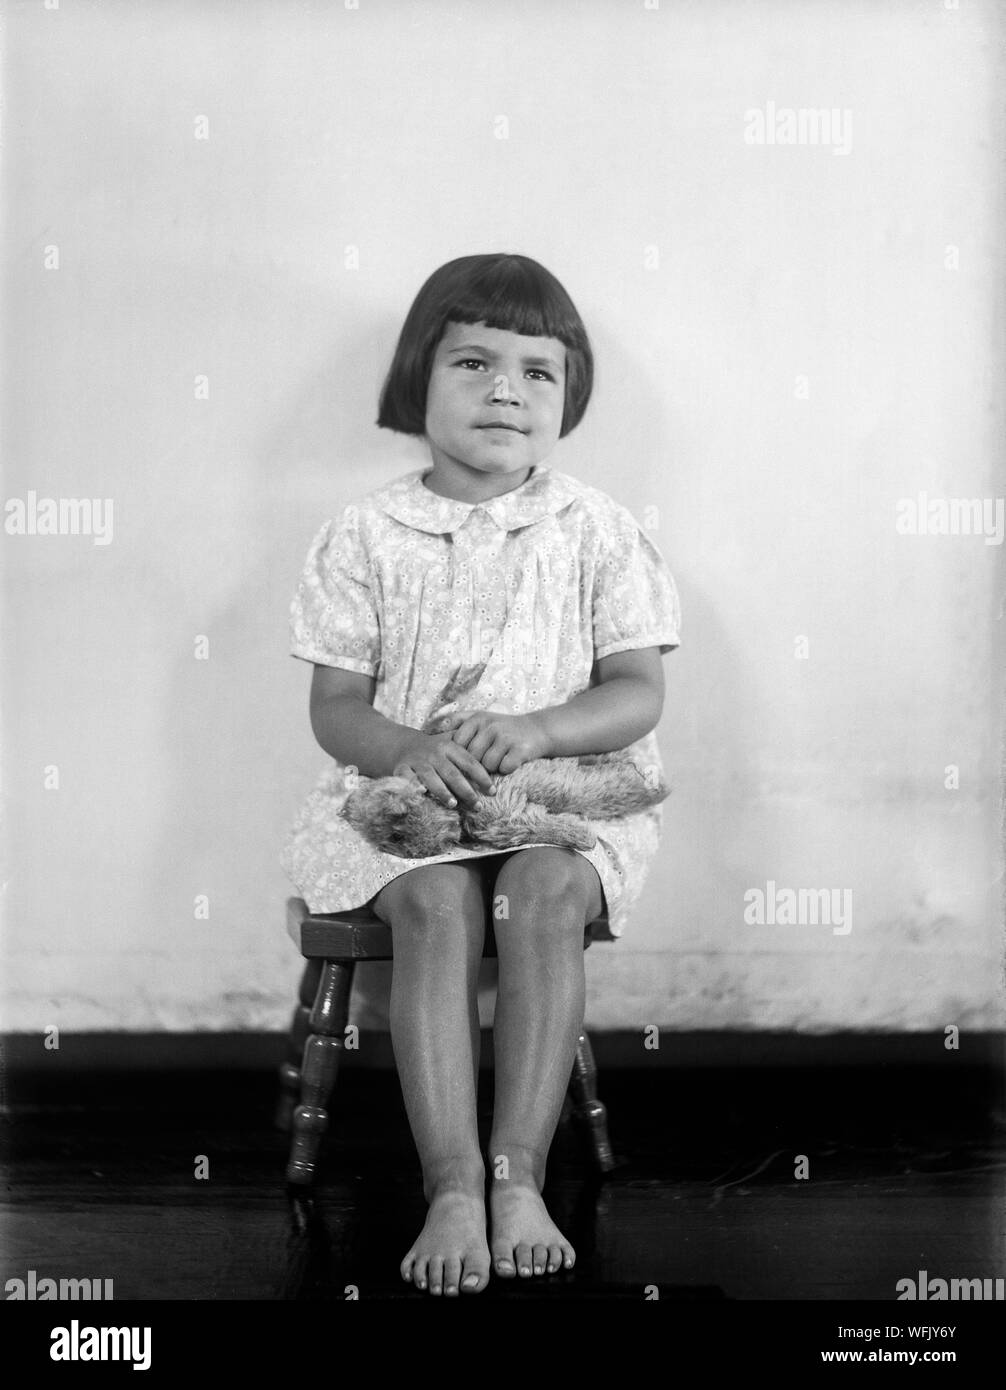 A vintage late Victorian or early Edwardian black and white photograph showing a young girl with a short bobbed haircut, sitting in a chair facing the camera. She is barefoot, and holding a toy teddy bear. Stock Photo